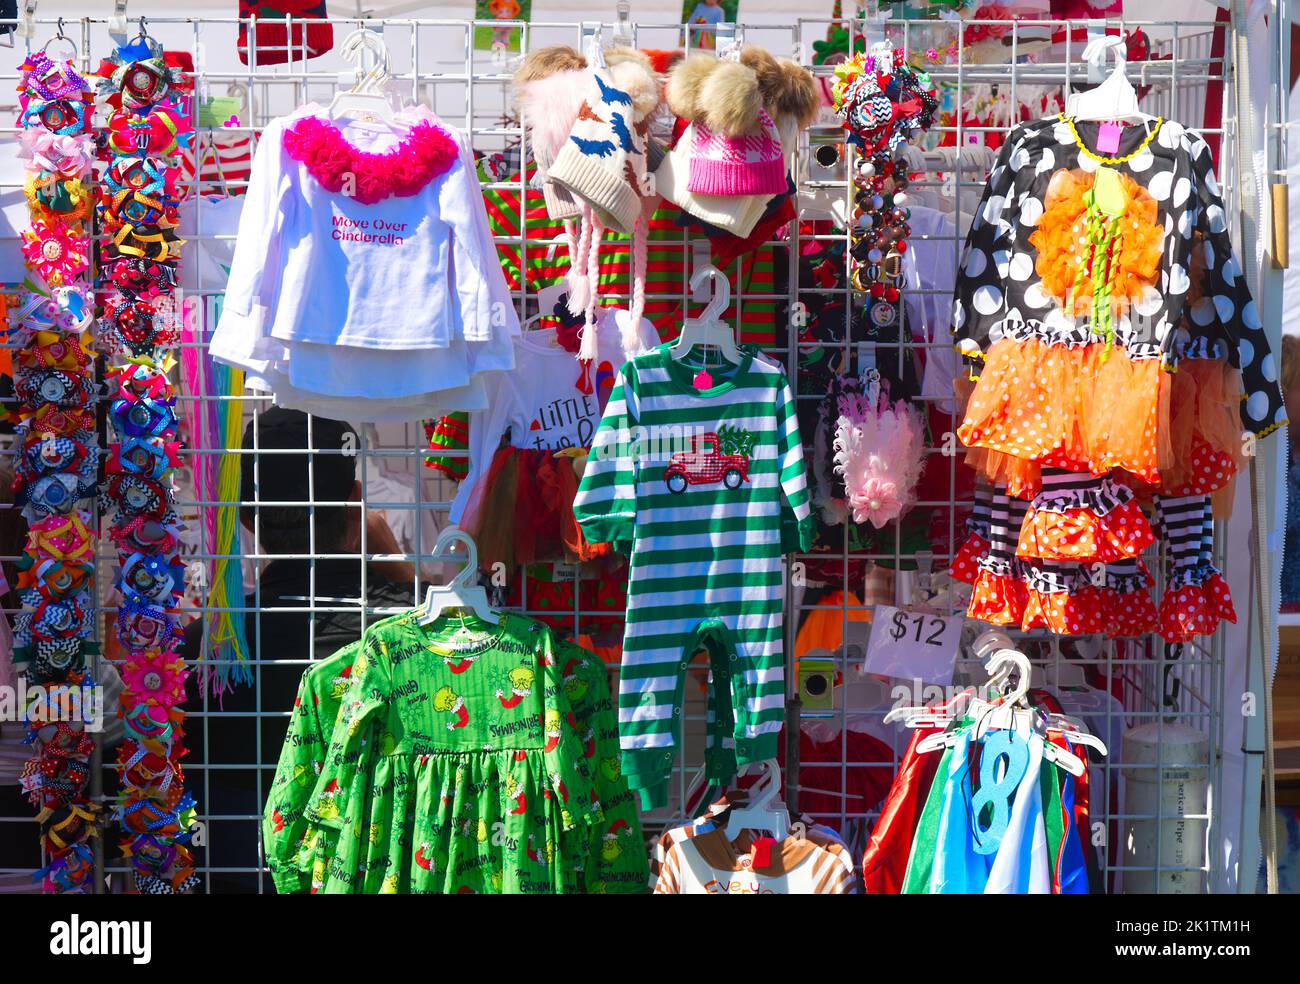 Items on display at the annual Cranberry Festival in Harwich, Massachusetts on Cape Cod, USA Stock Photo